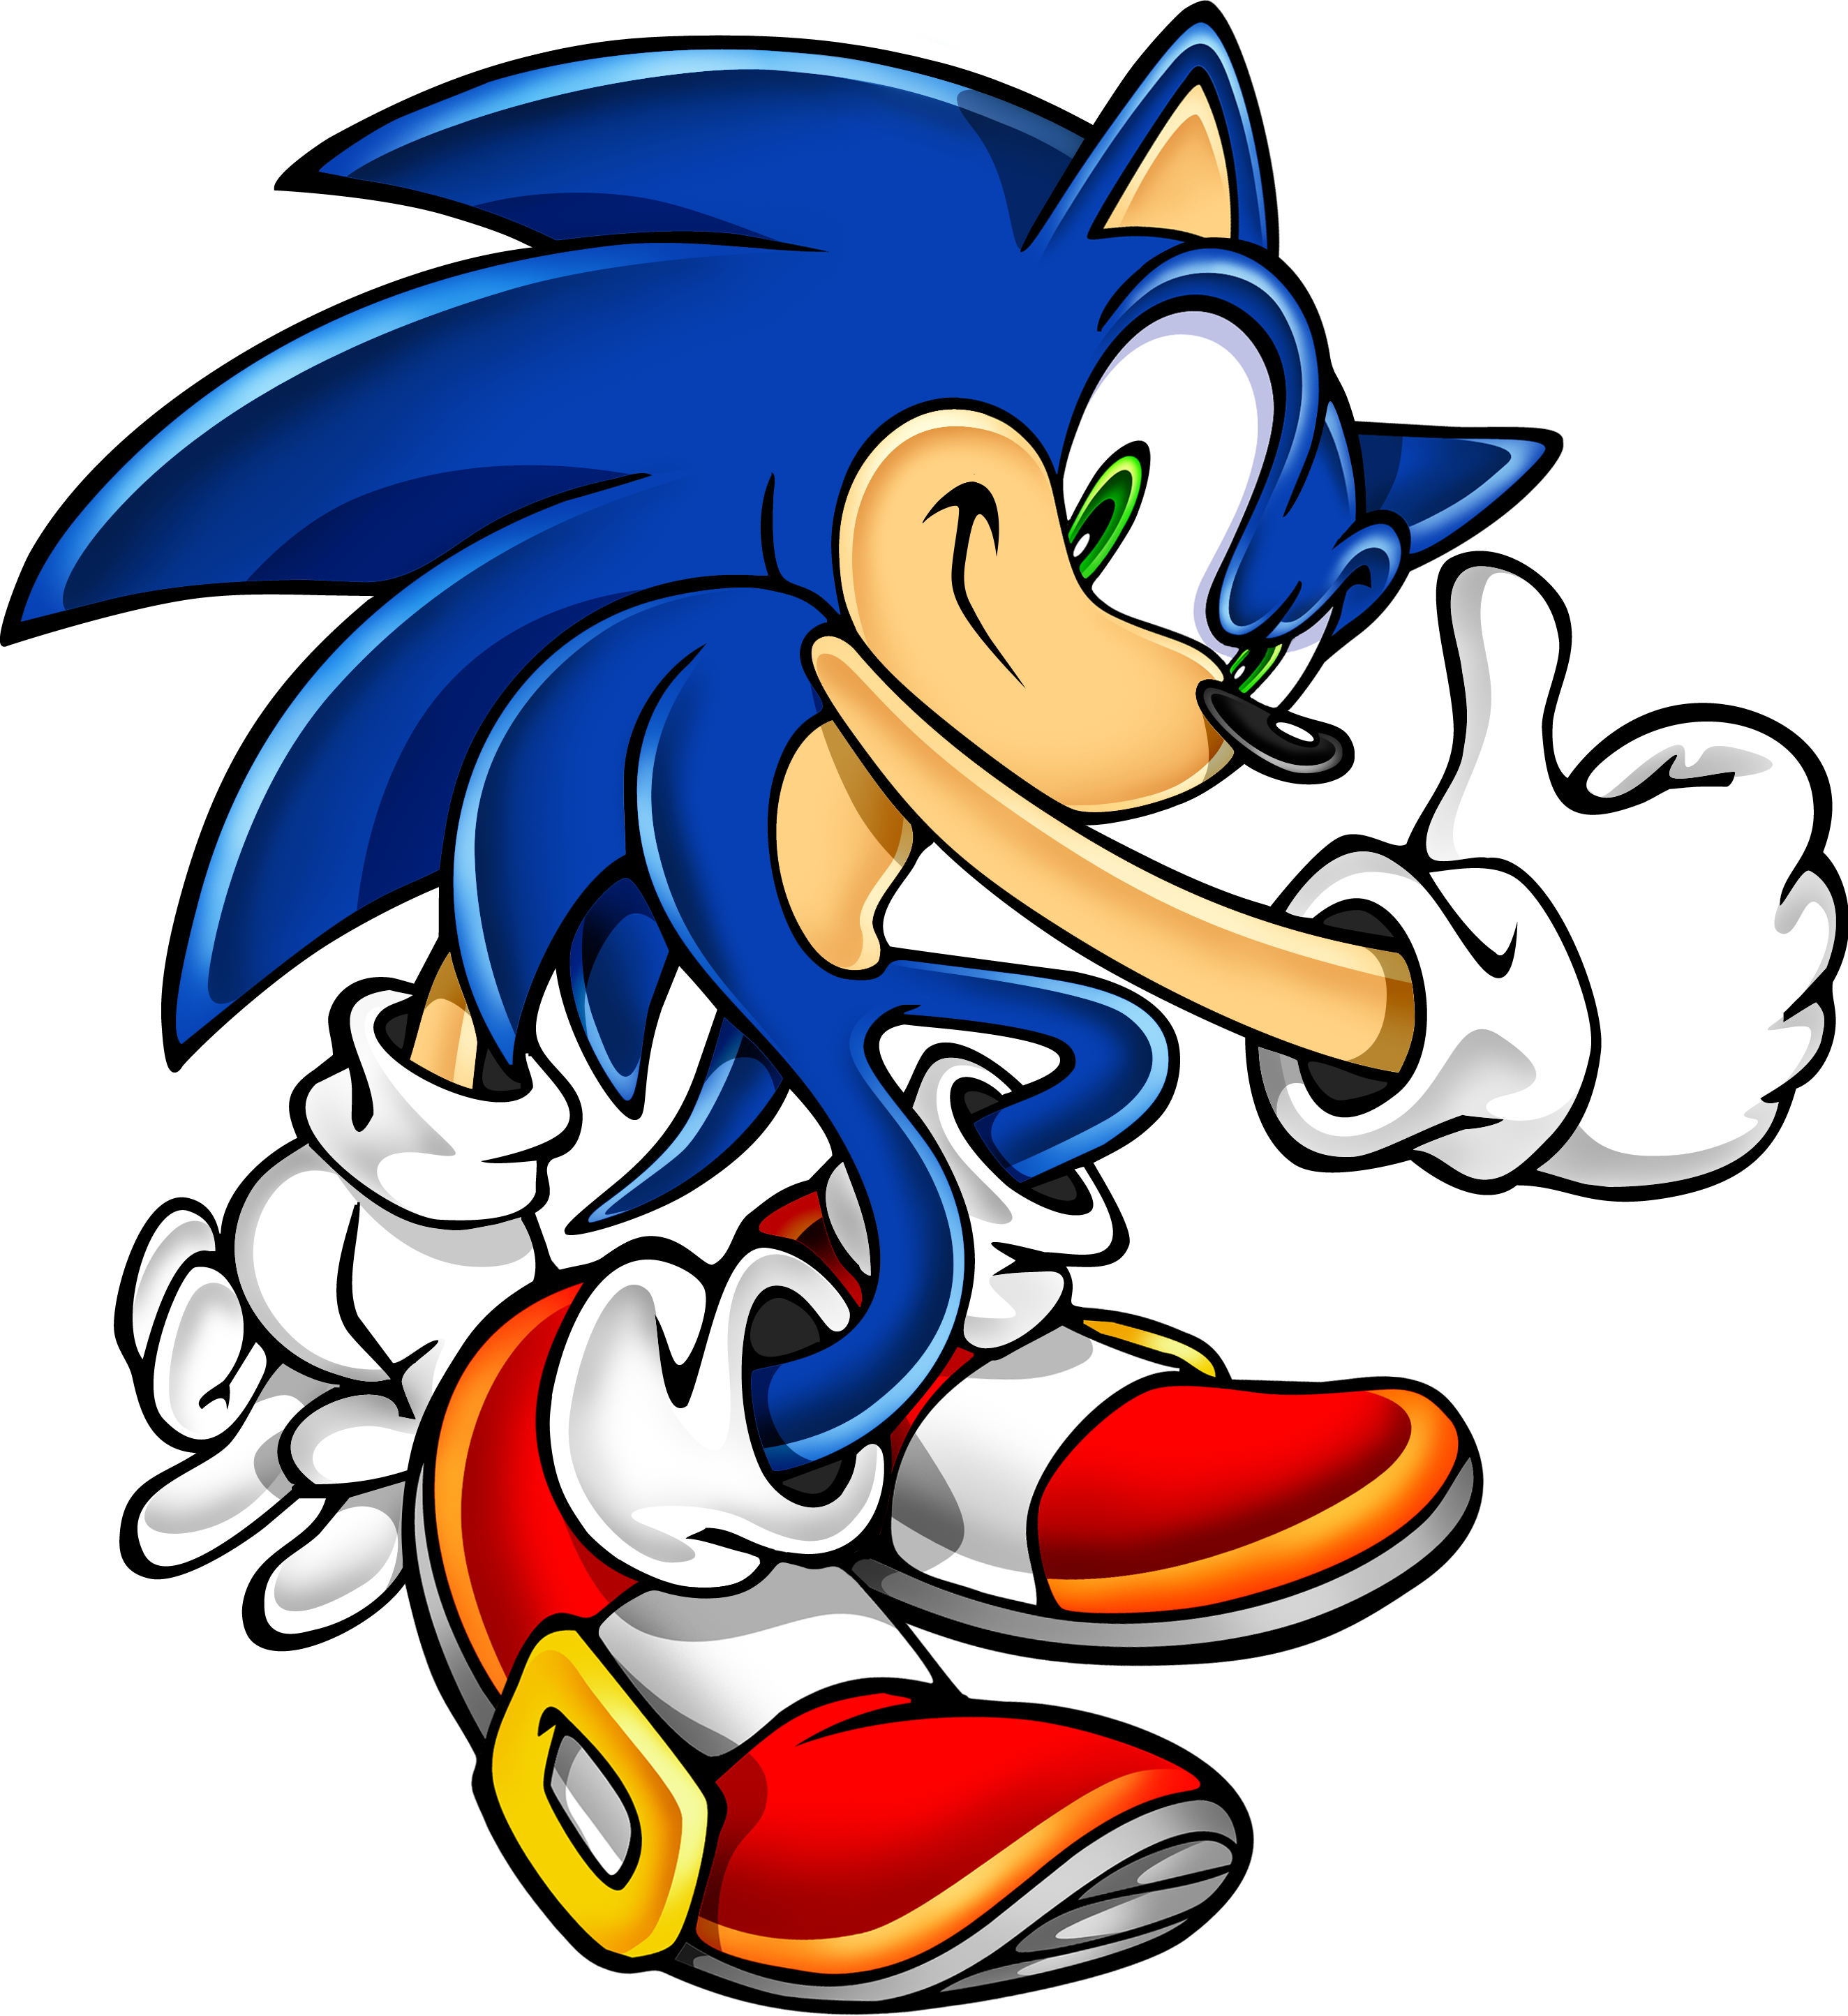 http://static3.wikia.nocookie.net/__cb20101018073734/sonic/images/7/75/Sonic_Art_Assets_DVD_-_Sonic_The_Hedgehog_-_17.png